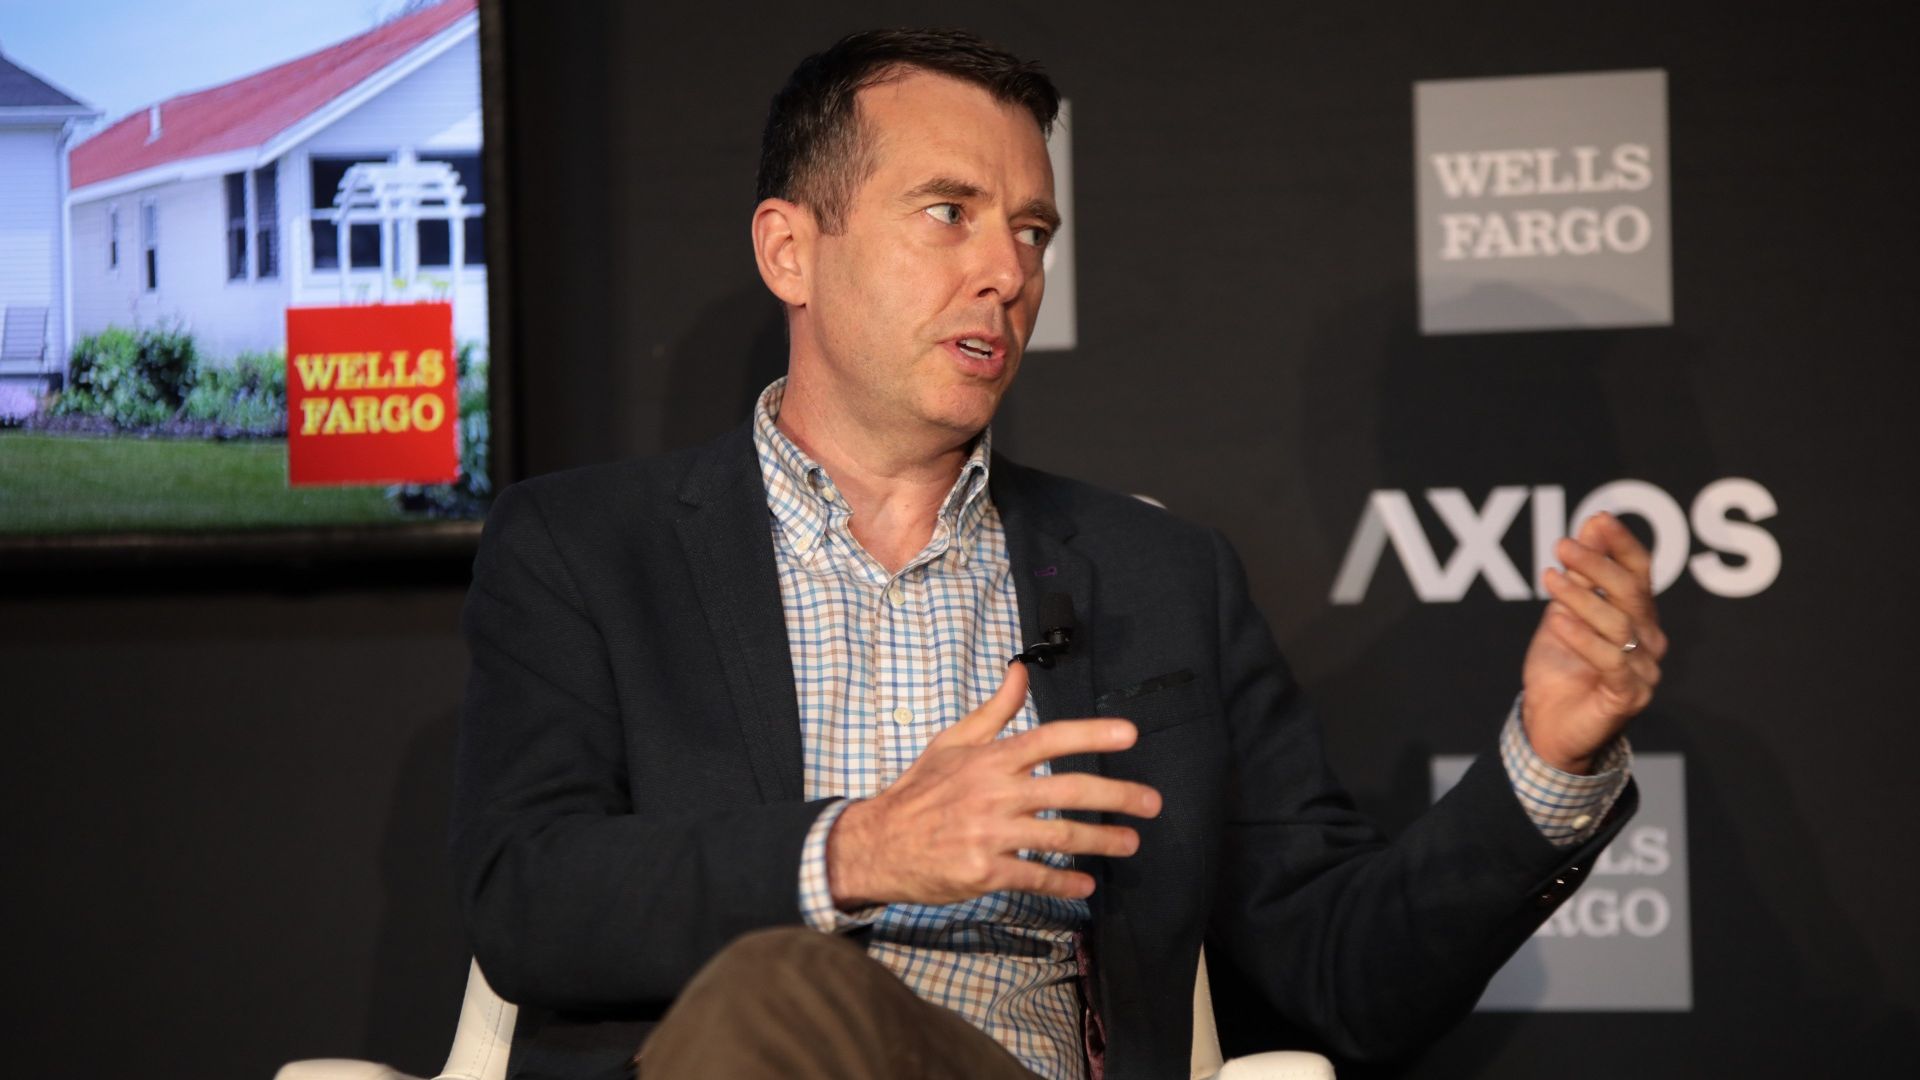 Chan Zuckerberg Initiative President of Policy and Advocacy David Plouffe speaks at an Axios event.